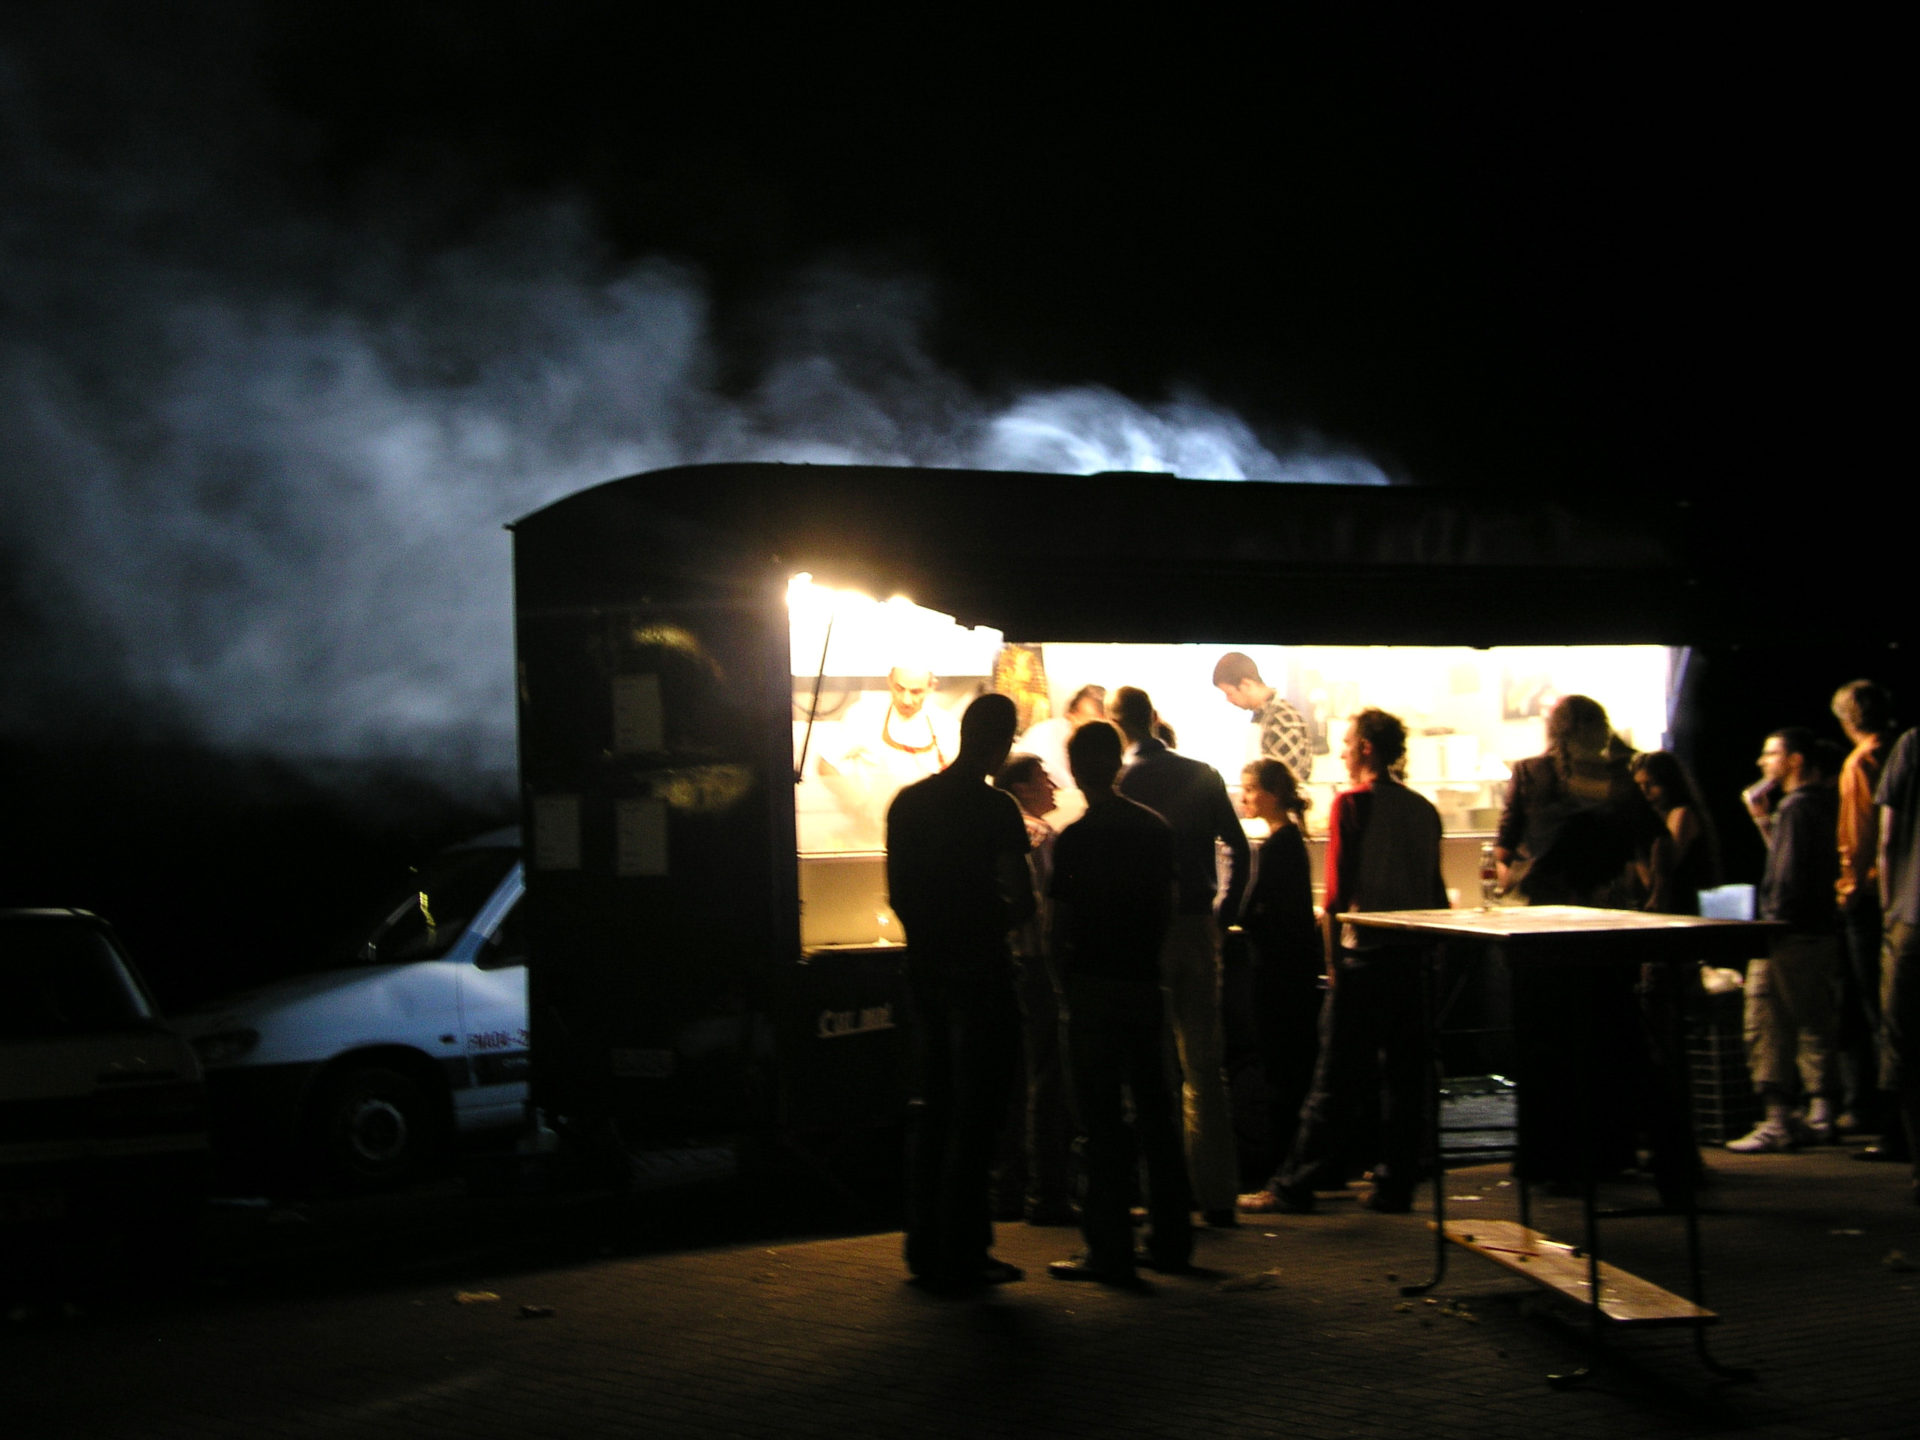 at night, a group of people is silhouetted in the light from a food cart. Smoke or steam rises in the background. 